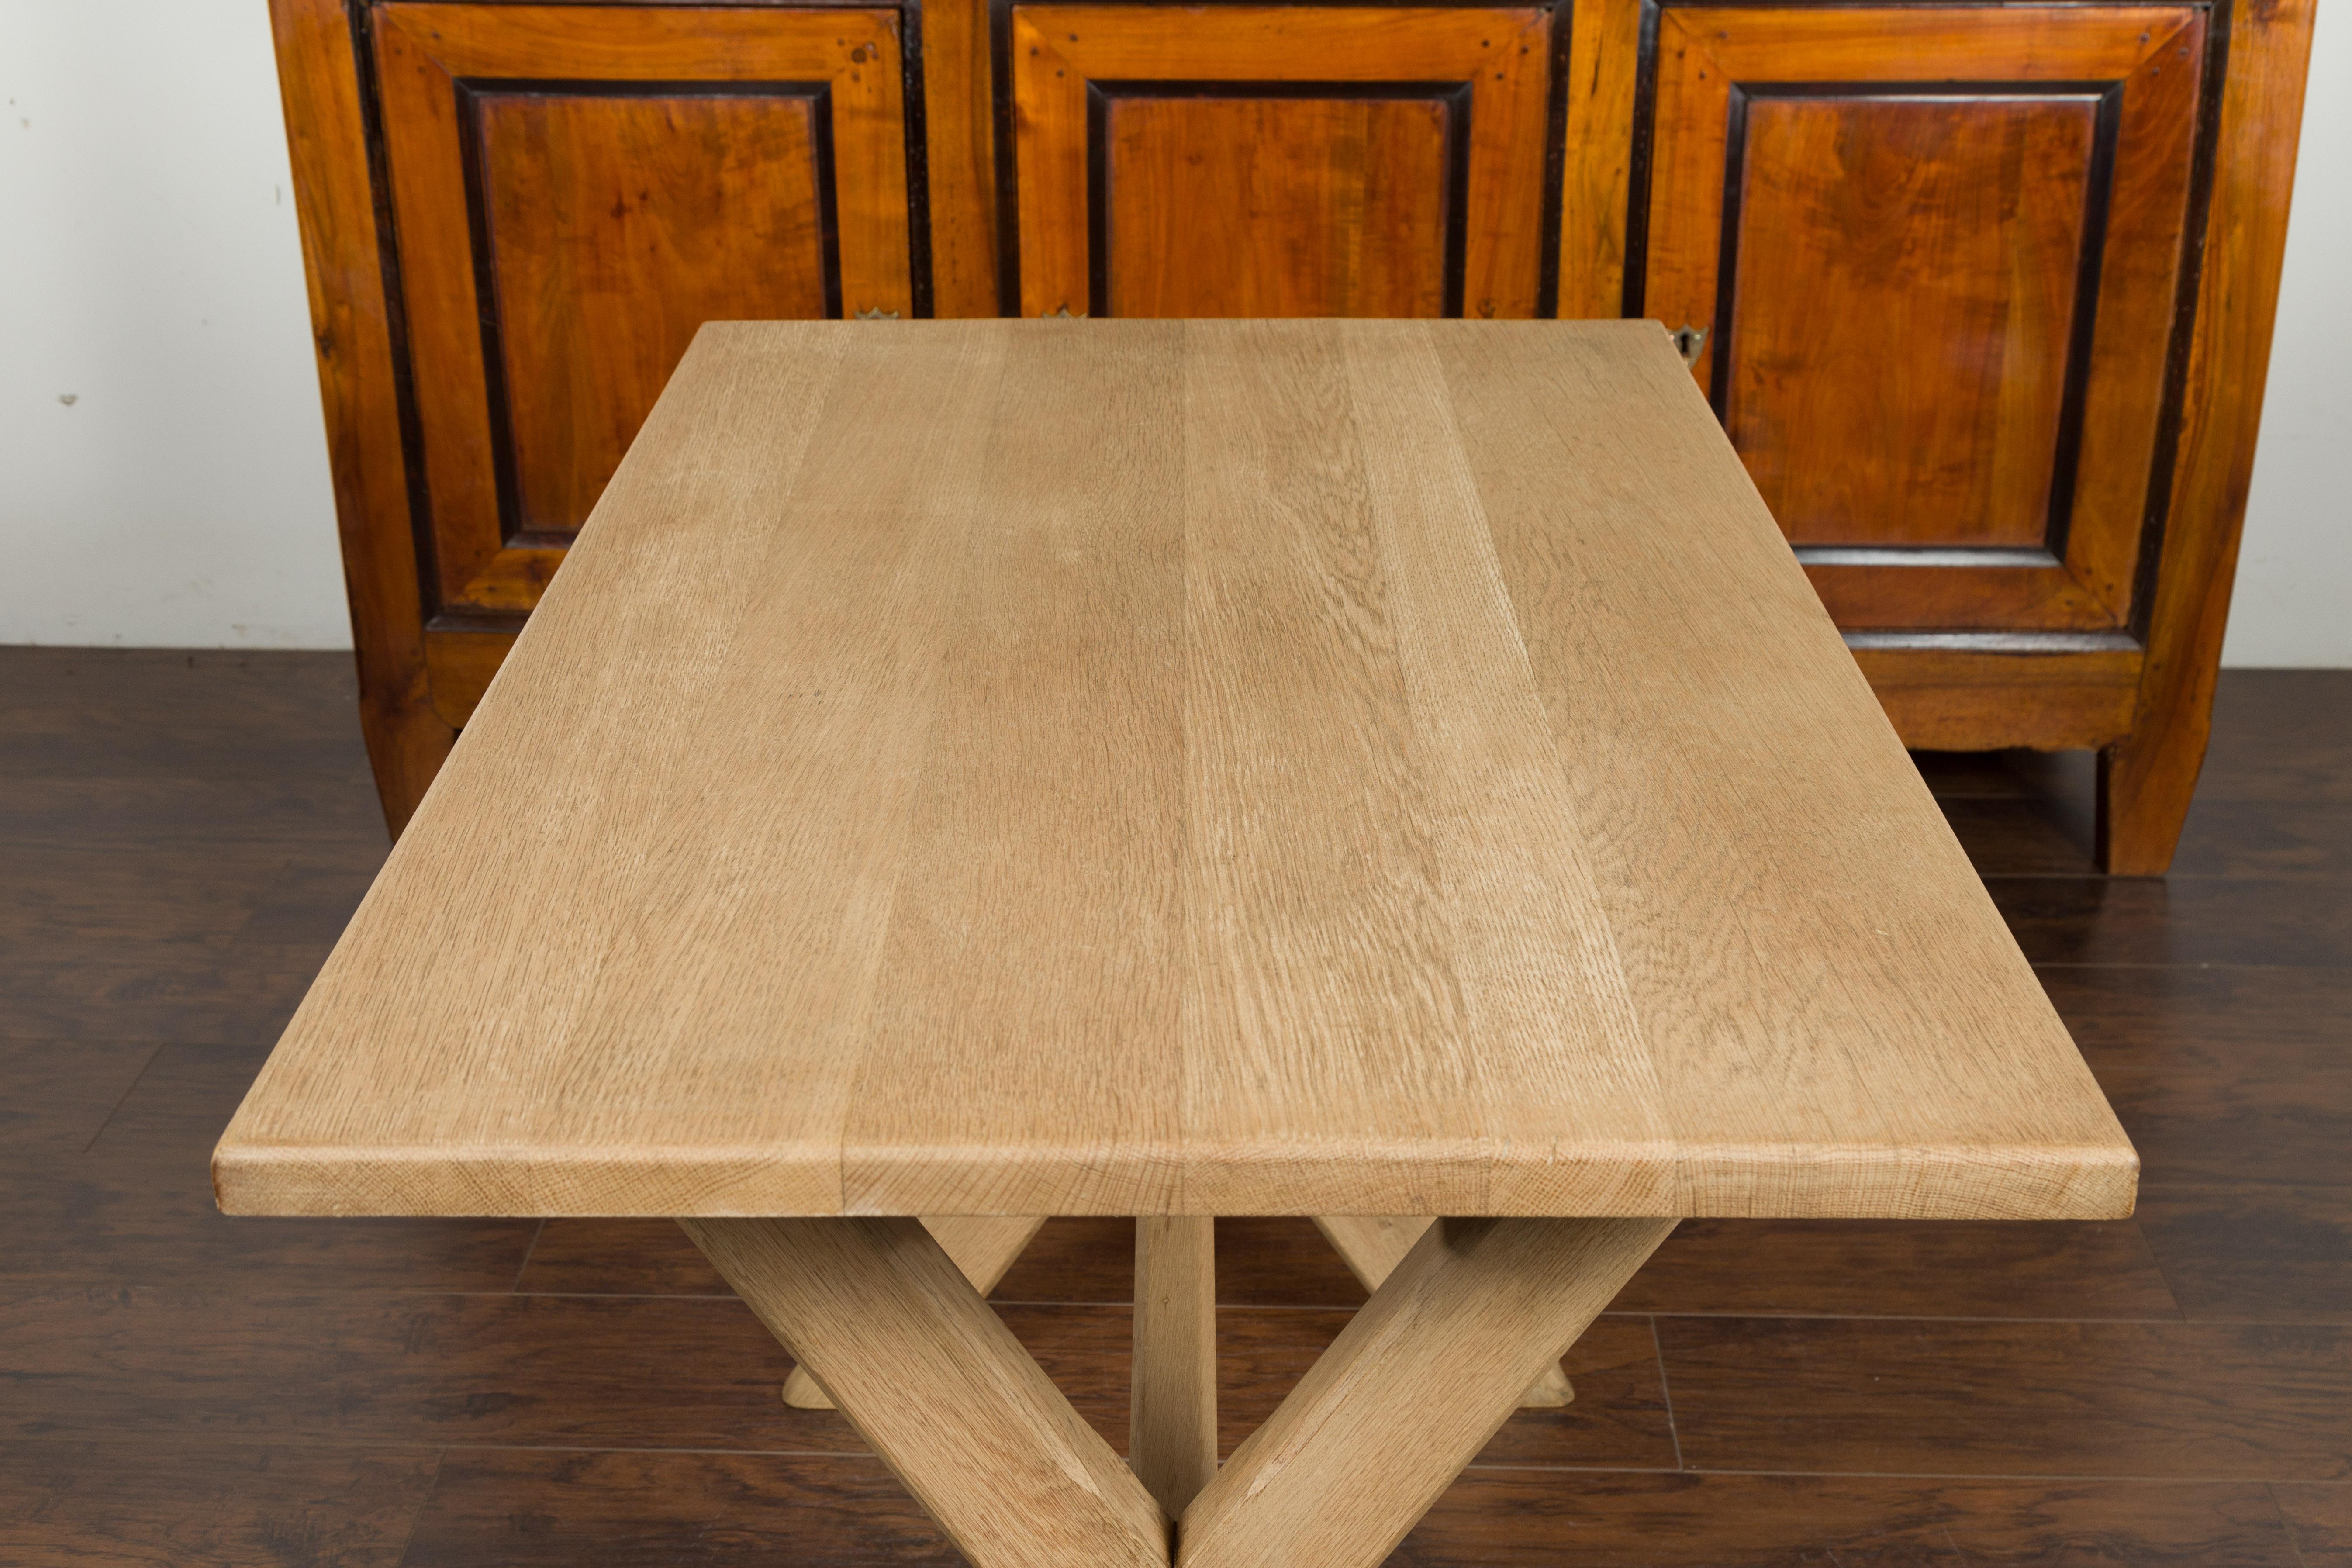 English Turn of the Century Oak Sawbuck Table with X-Form Base, circa 1900 For Sale 6